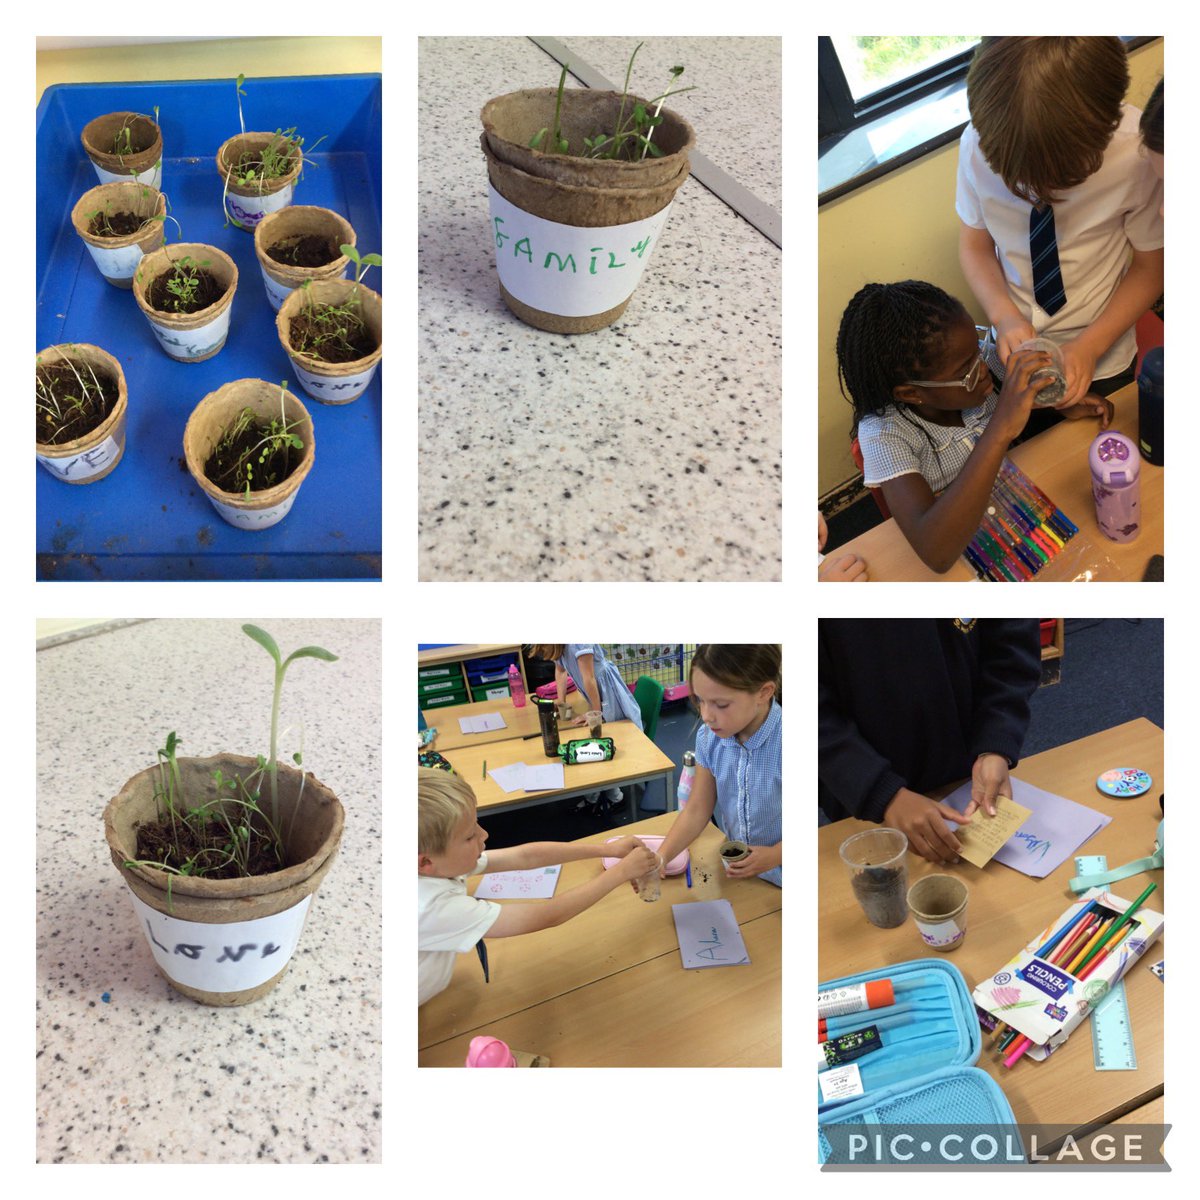 Year 3 have enjoyed planting seeds and thinking about what the word homes mean to them.